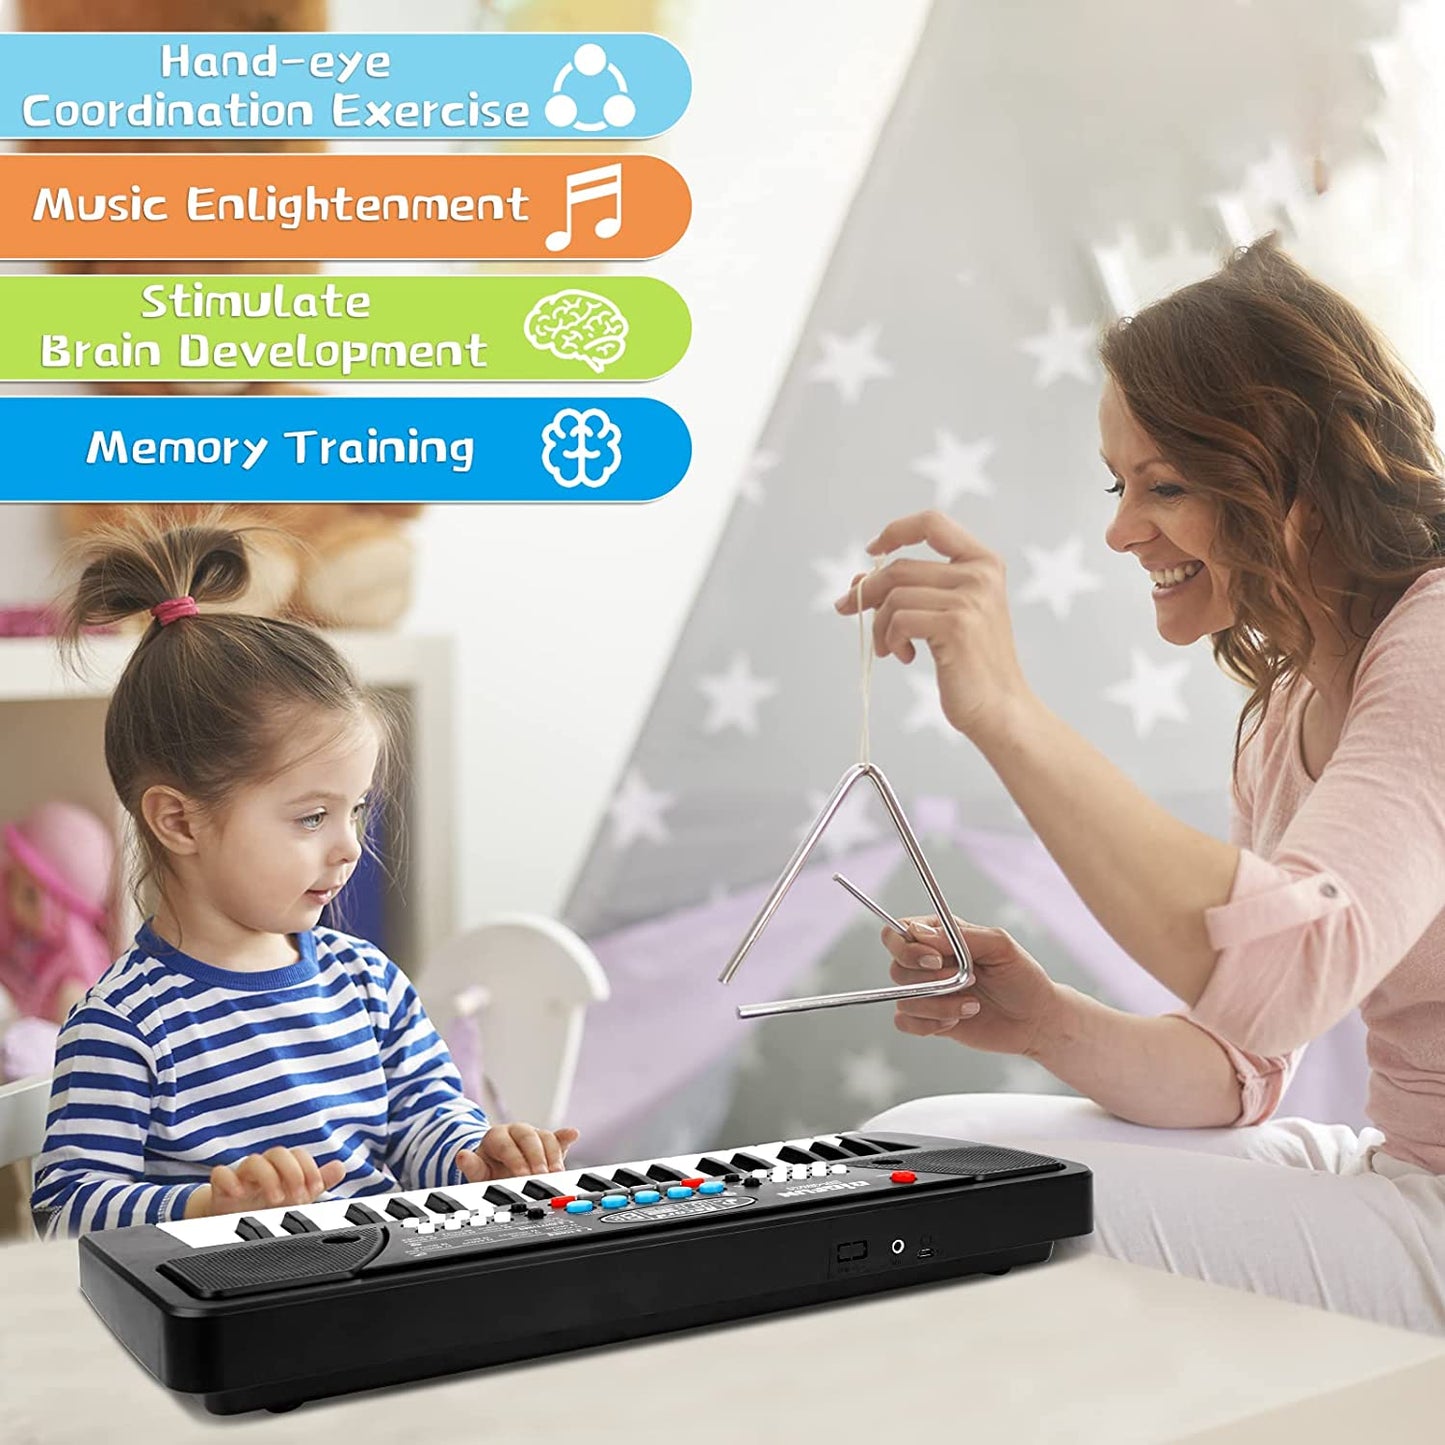 MM TOYS Kids Piano Keyboard with Microphone - 37 Keys, 8 Tones & 8 Rhythms, Ages 3-7, Perfect Gift for Young Musicians